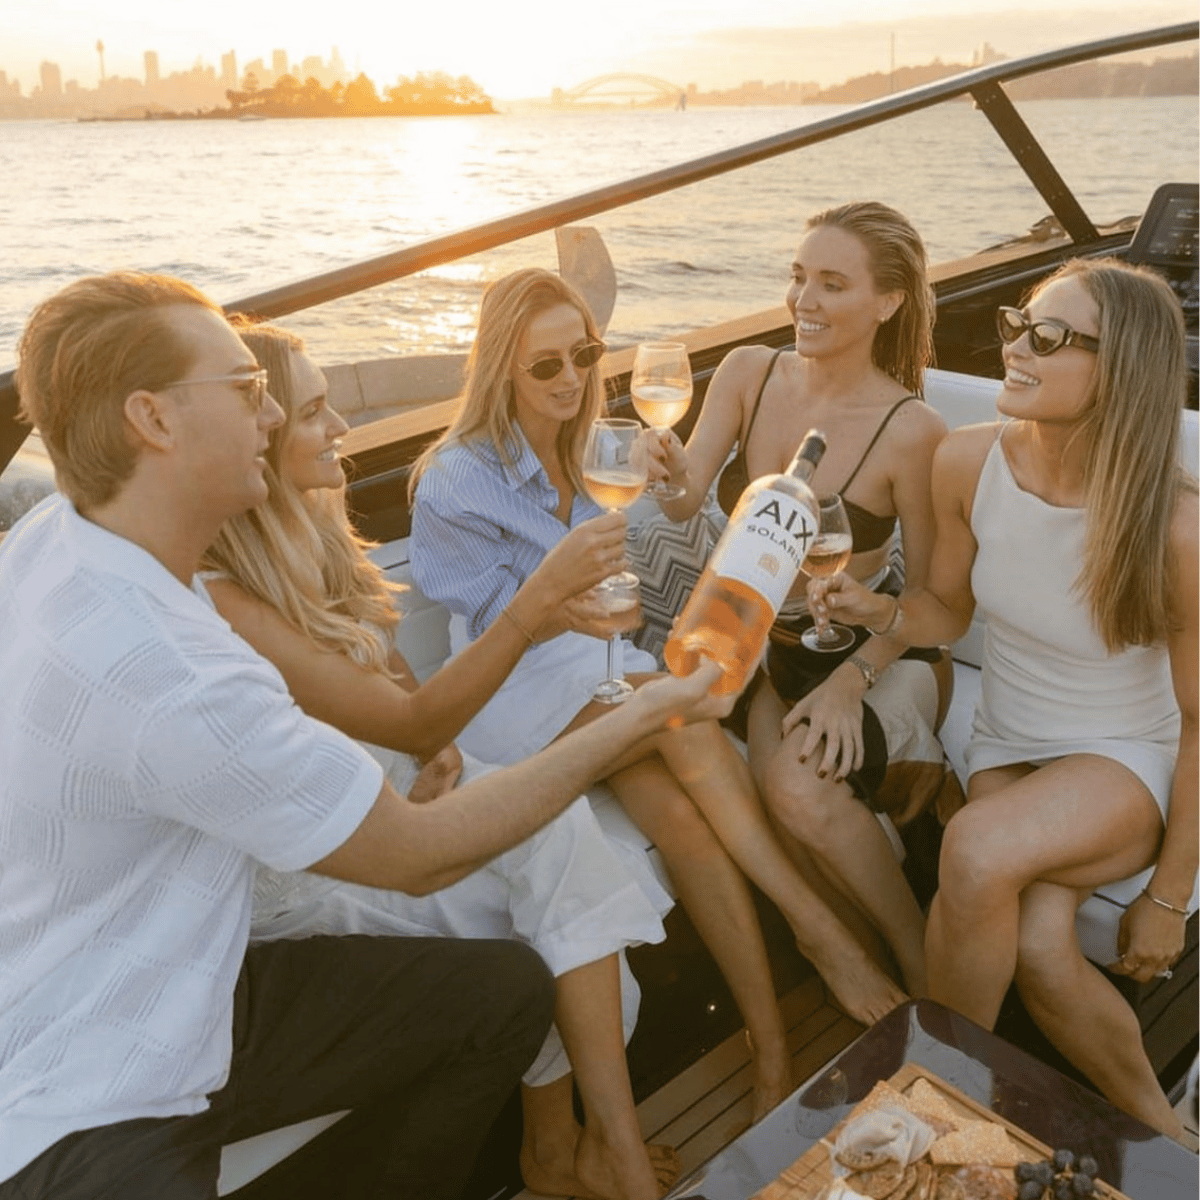 People on boat toasting with wine.